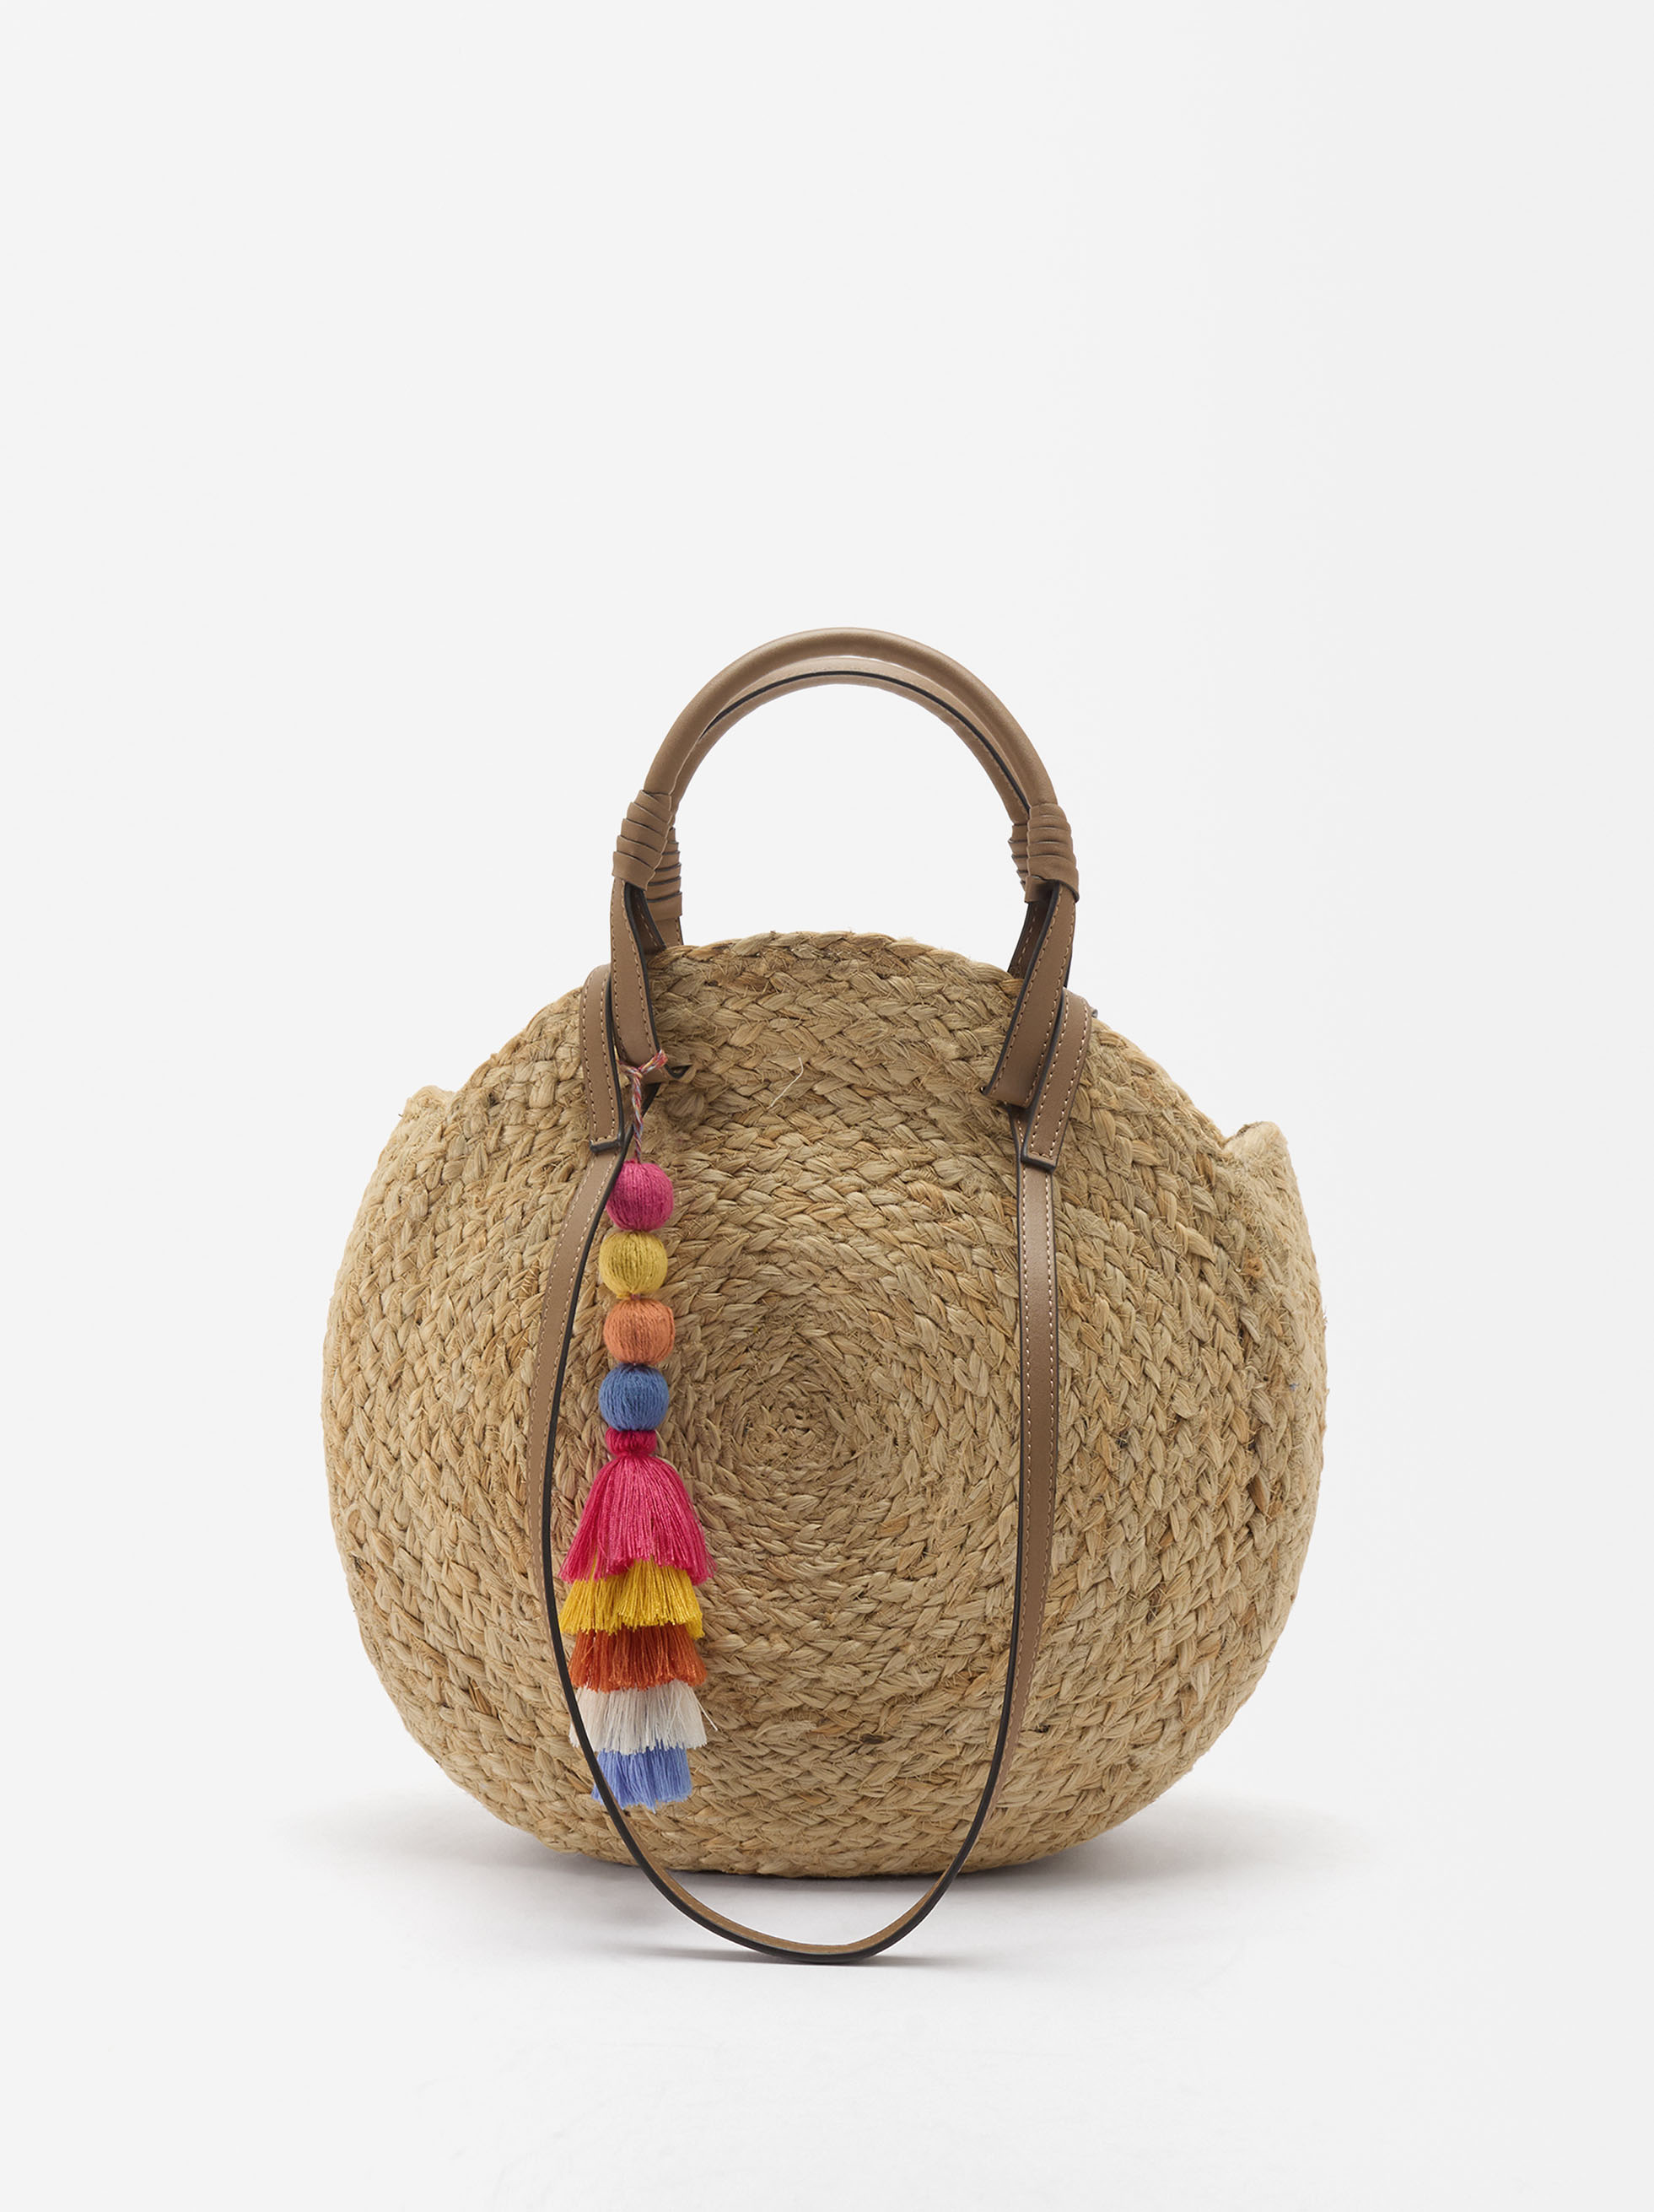 Straw Effect Shopper Bag With Pendant image number 2.0